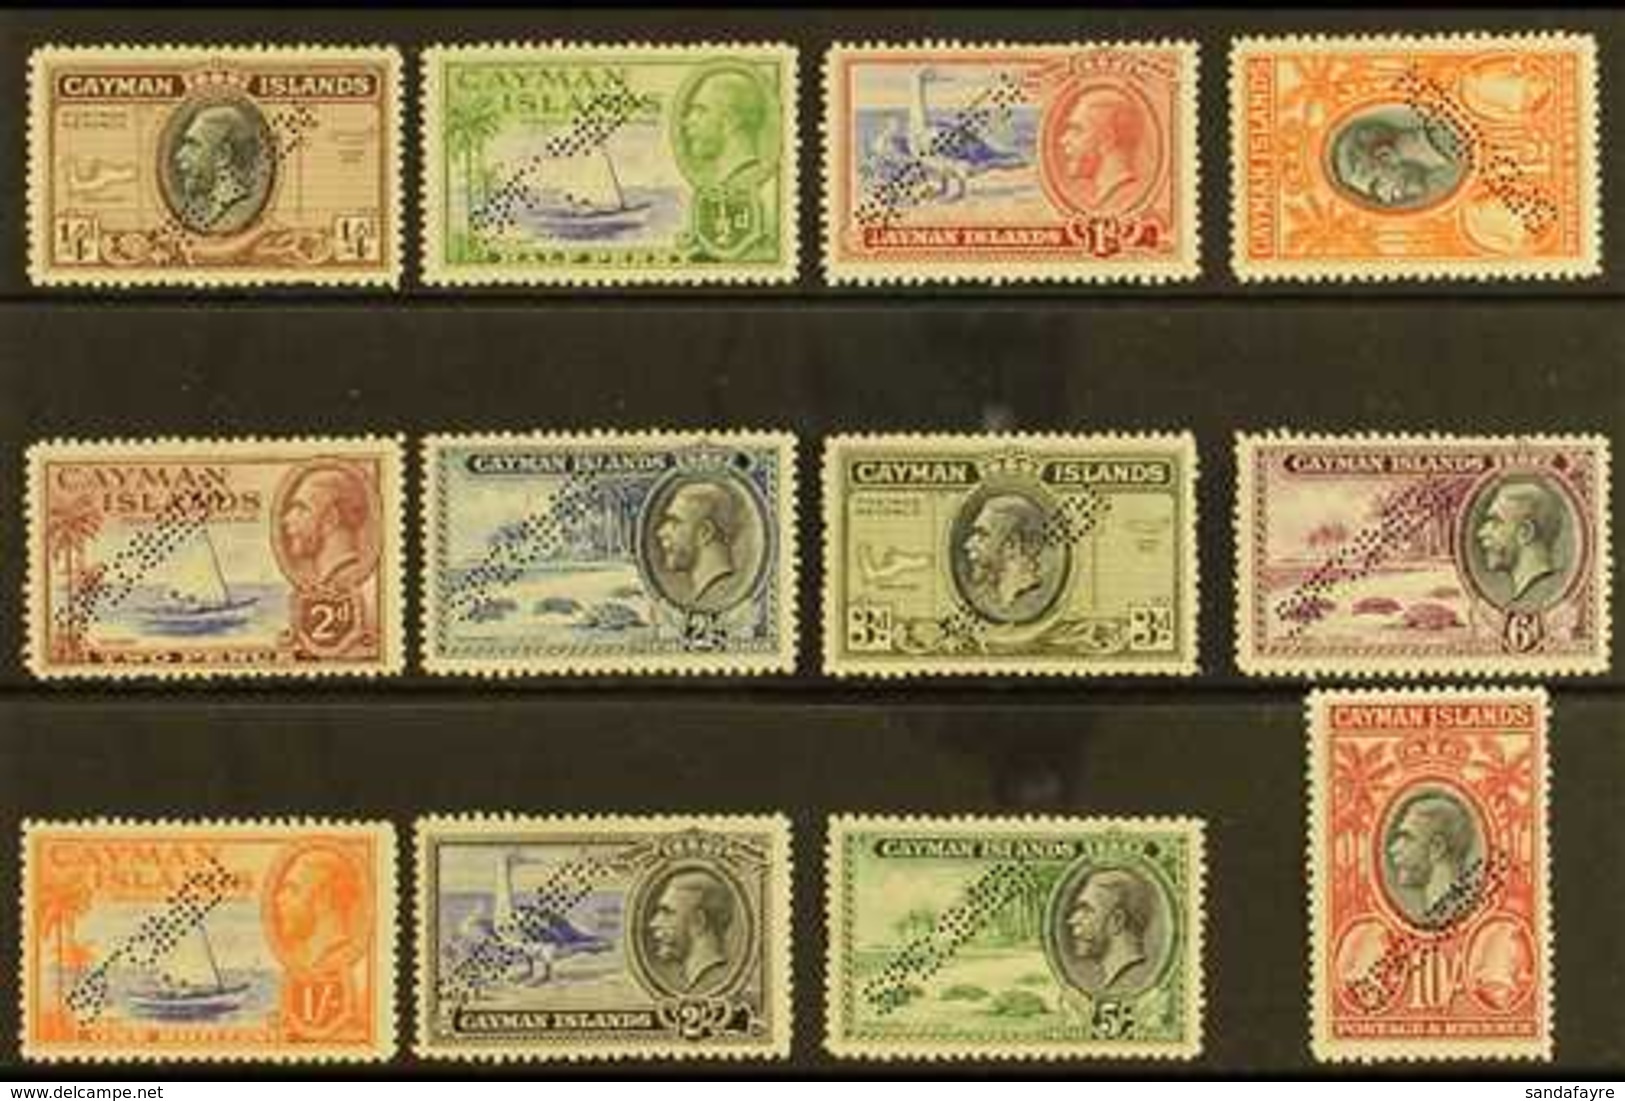 1935 Pictorial Definitives Complete Set With "SPECIMEN" Perfin, SG 96s/107s, ½d Value With Small Thin, Otherwise Fine Mi - Cayman Islands